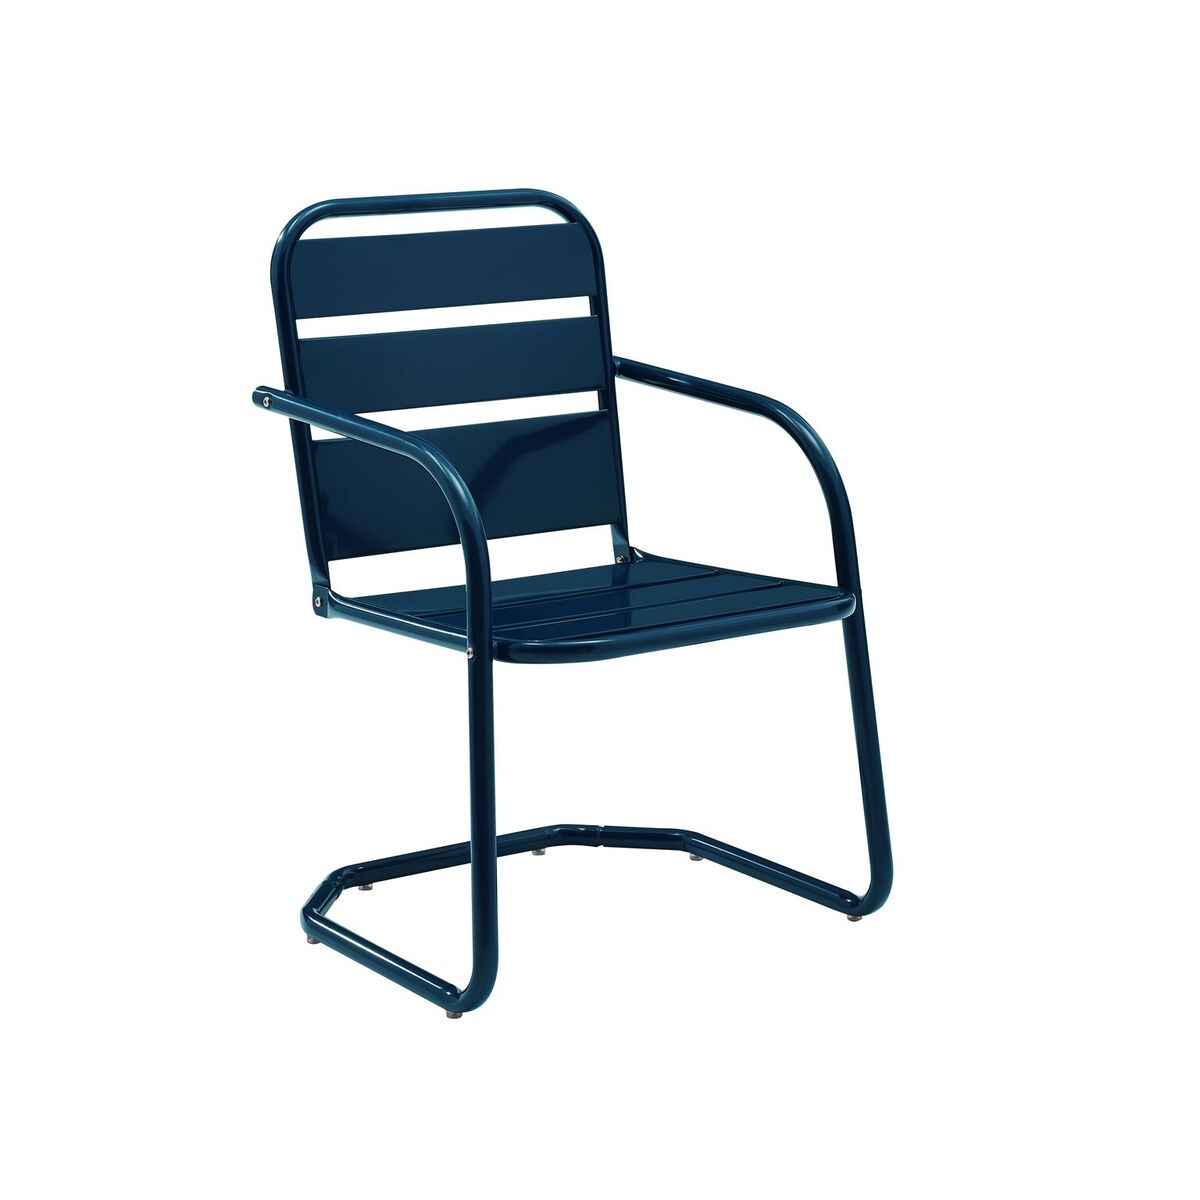 Picture of Crosley Furniture CO1030-NV Brighton Metal Chair, Navy Gloss - Set of 2, 22.88 x 23.63 x 33.25 in.